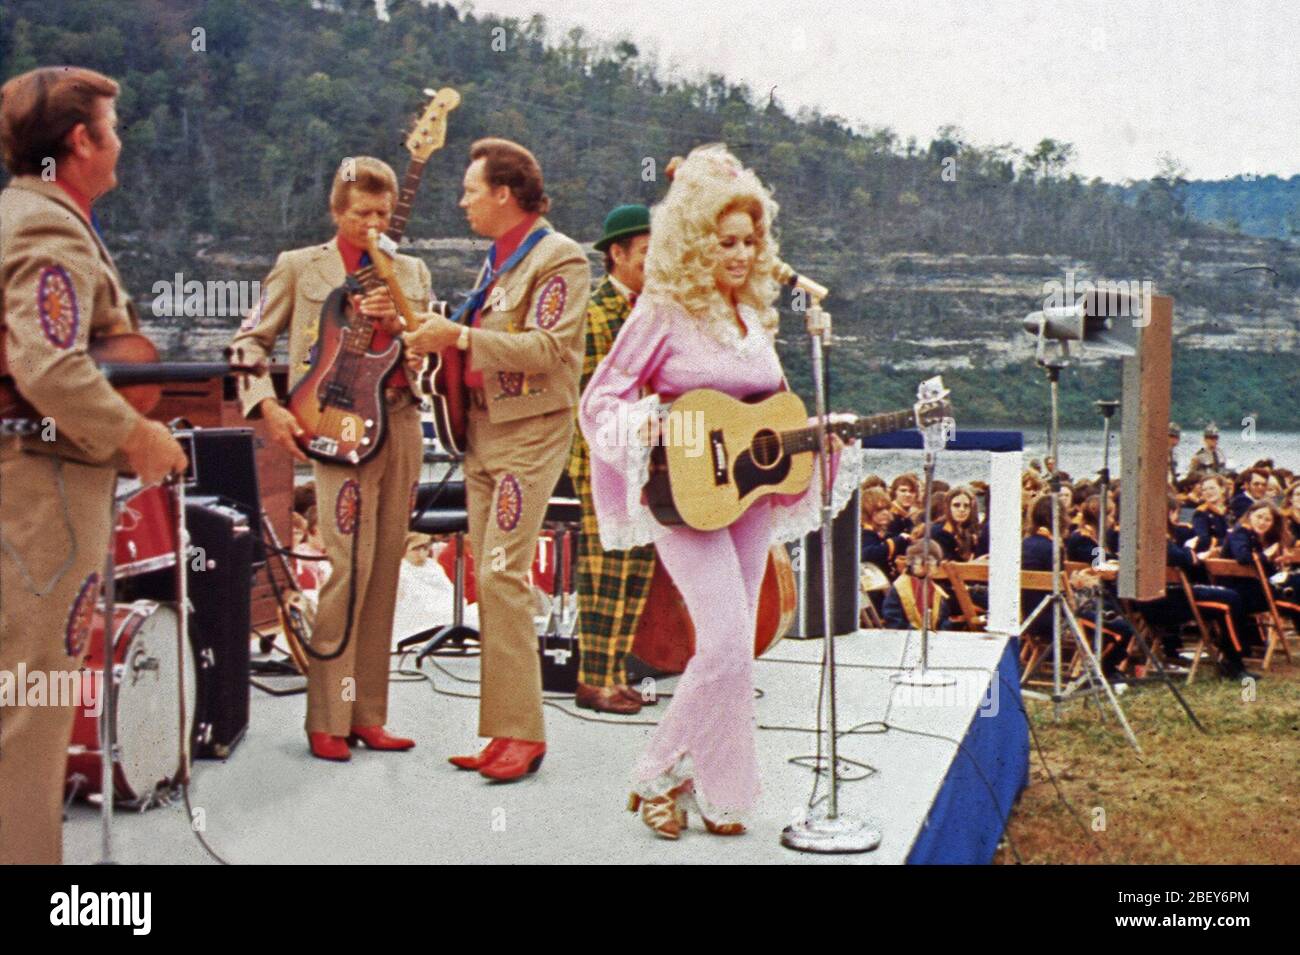 Country music star Dolly Parton performs at the Cordell Hull Dam Dedication Oct. 13, 1973, on the shore of the Cumberland River at the dam in Carthage, Tenn. According to an Associated Press report following the event about 2,000 people attended. Tricia Nixon Cox, daughter of President Richard M. Nixon, was the keynote speaker at the dedication. Stock Photo